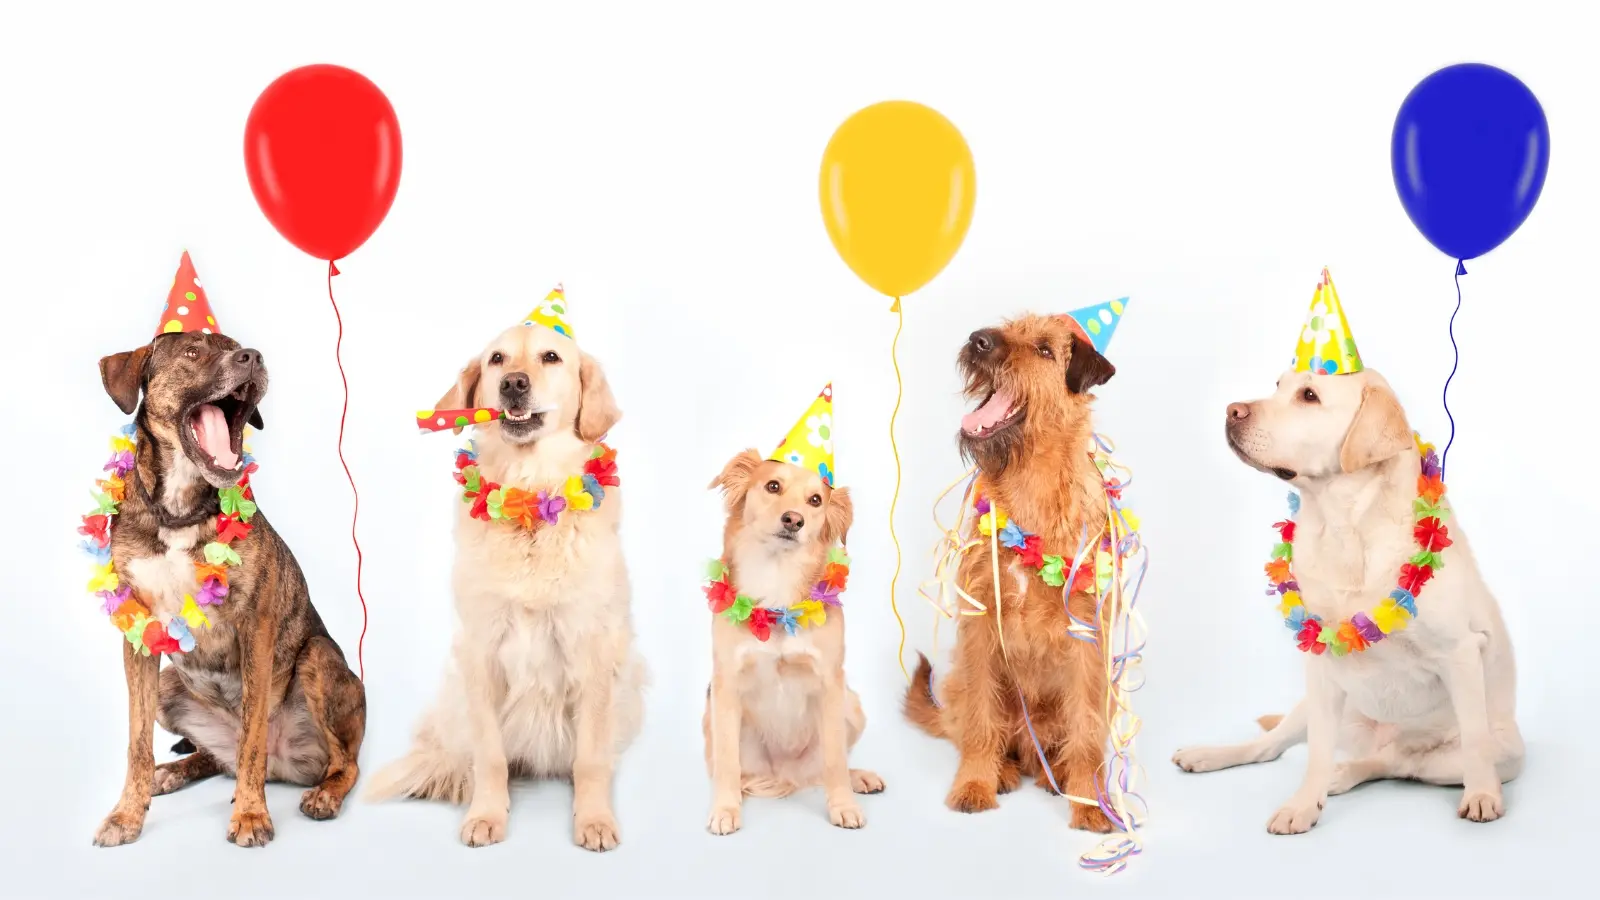 Safety Tips for Hosting a Dog Birthday Party